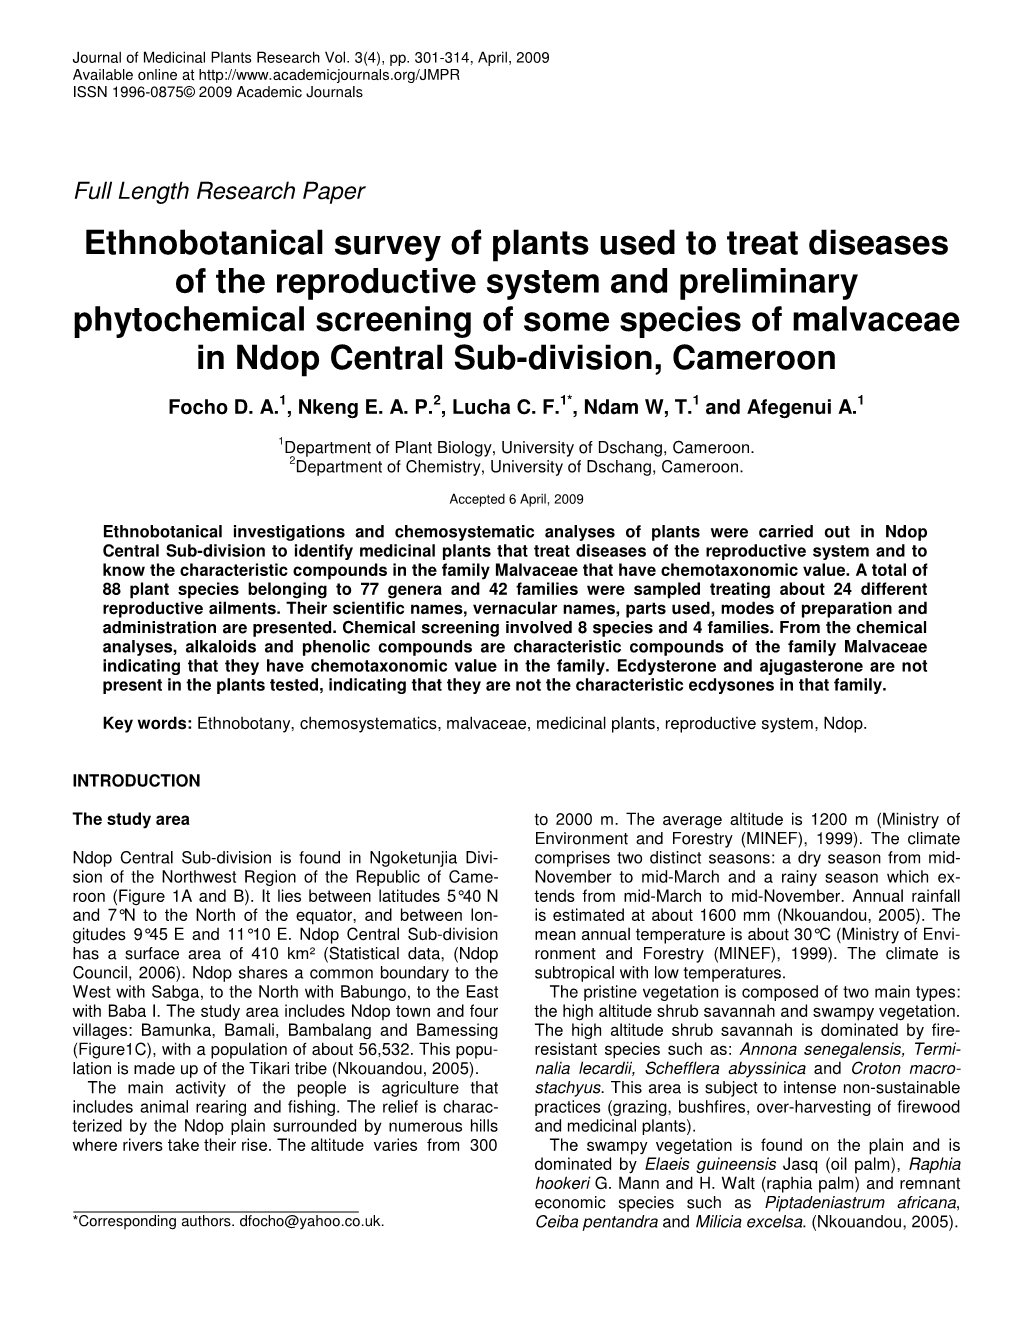 Ethnobotanical Survey of Plants Used to Treat Diseases of the Reproductive